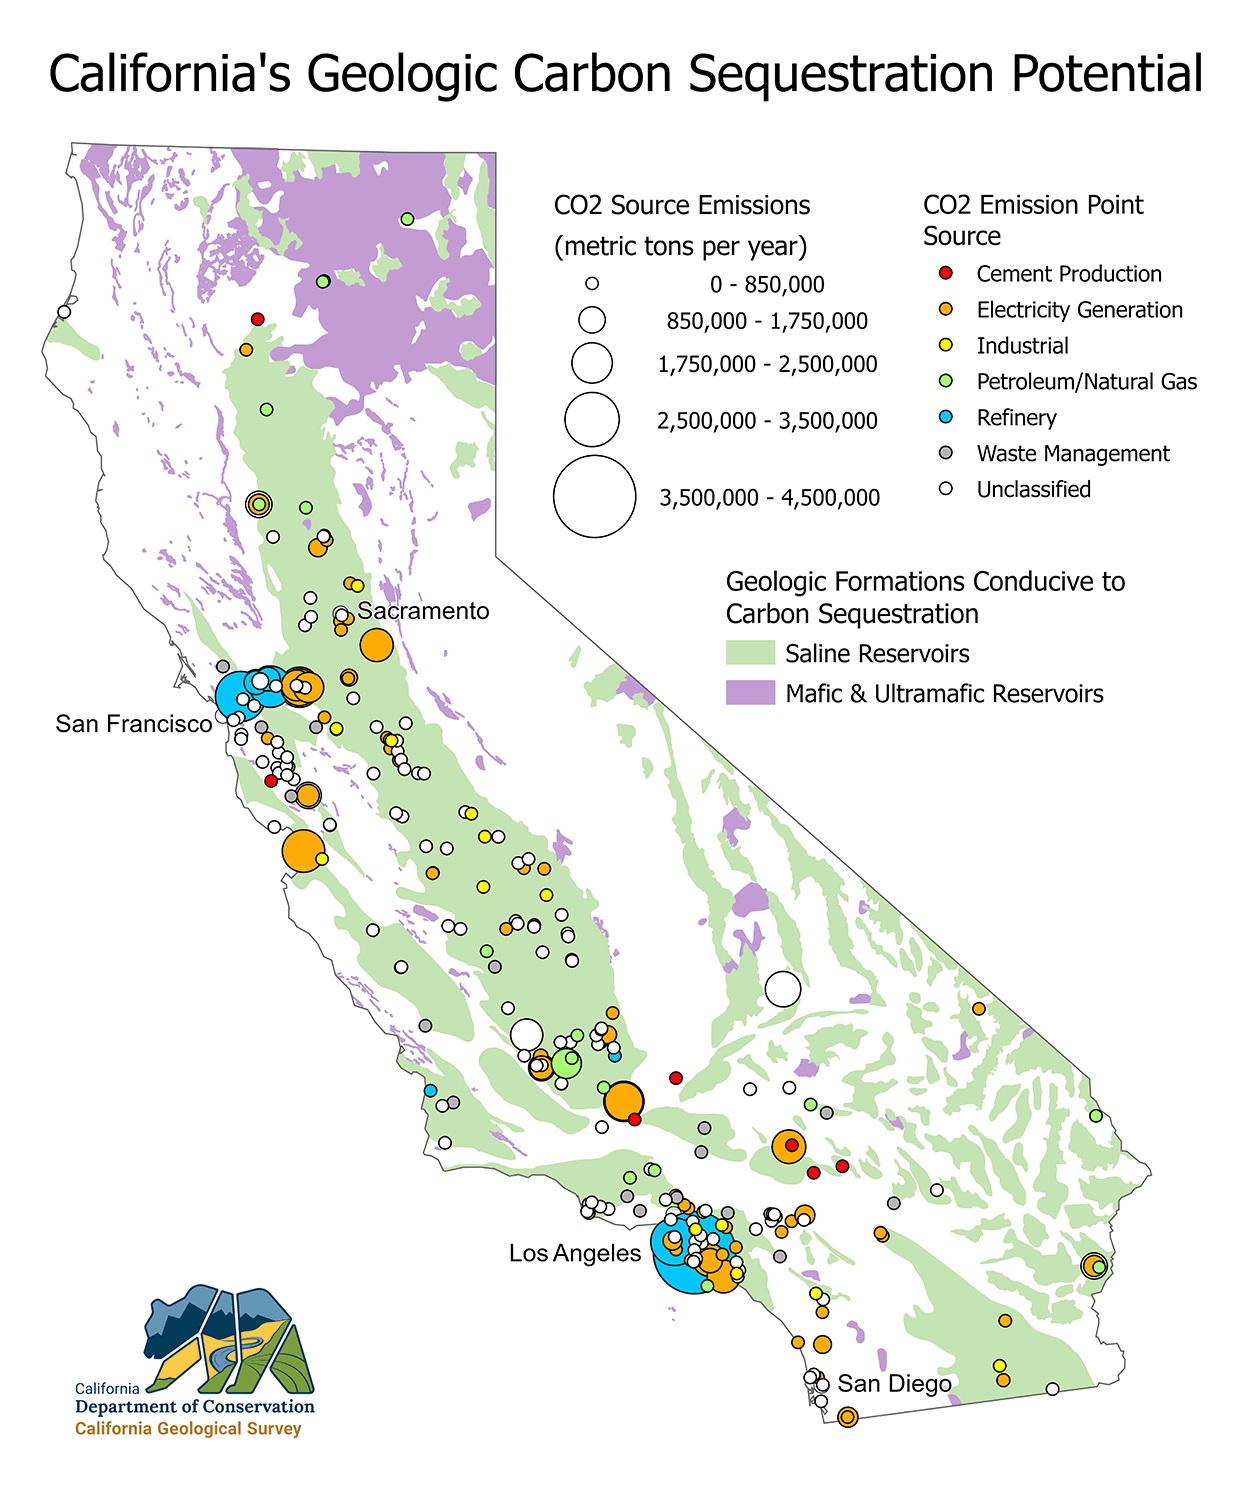 Figure 2. Map of California showing geologic formations conducive to carbon sequestration. Saline, mafic, and ultramafic reservoirs have been identified all over the state except the Sierra Nevada, the Northern Coast Ranges, the Transverse Ranges, and the Peninsular Ranges. The map also shows sources of carbon dioxide emissions which are most abundant in the San Francisco Bay area, the Central Valley, and the Los Angeles area.